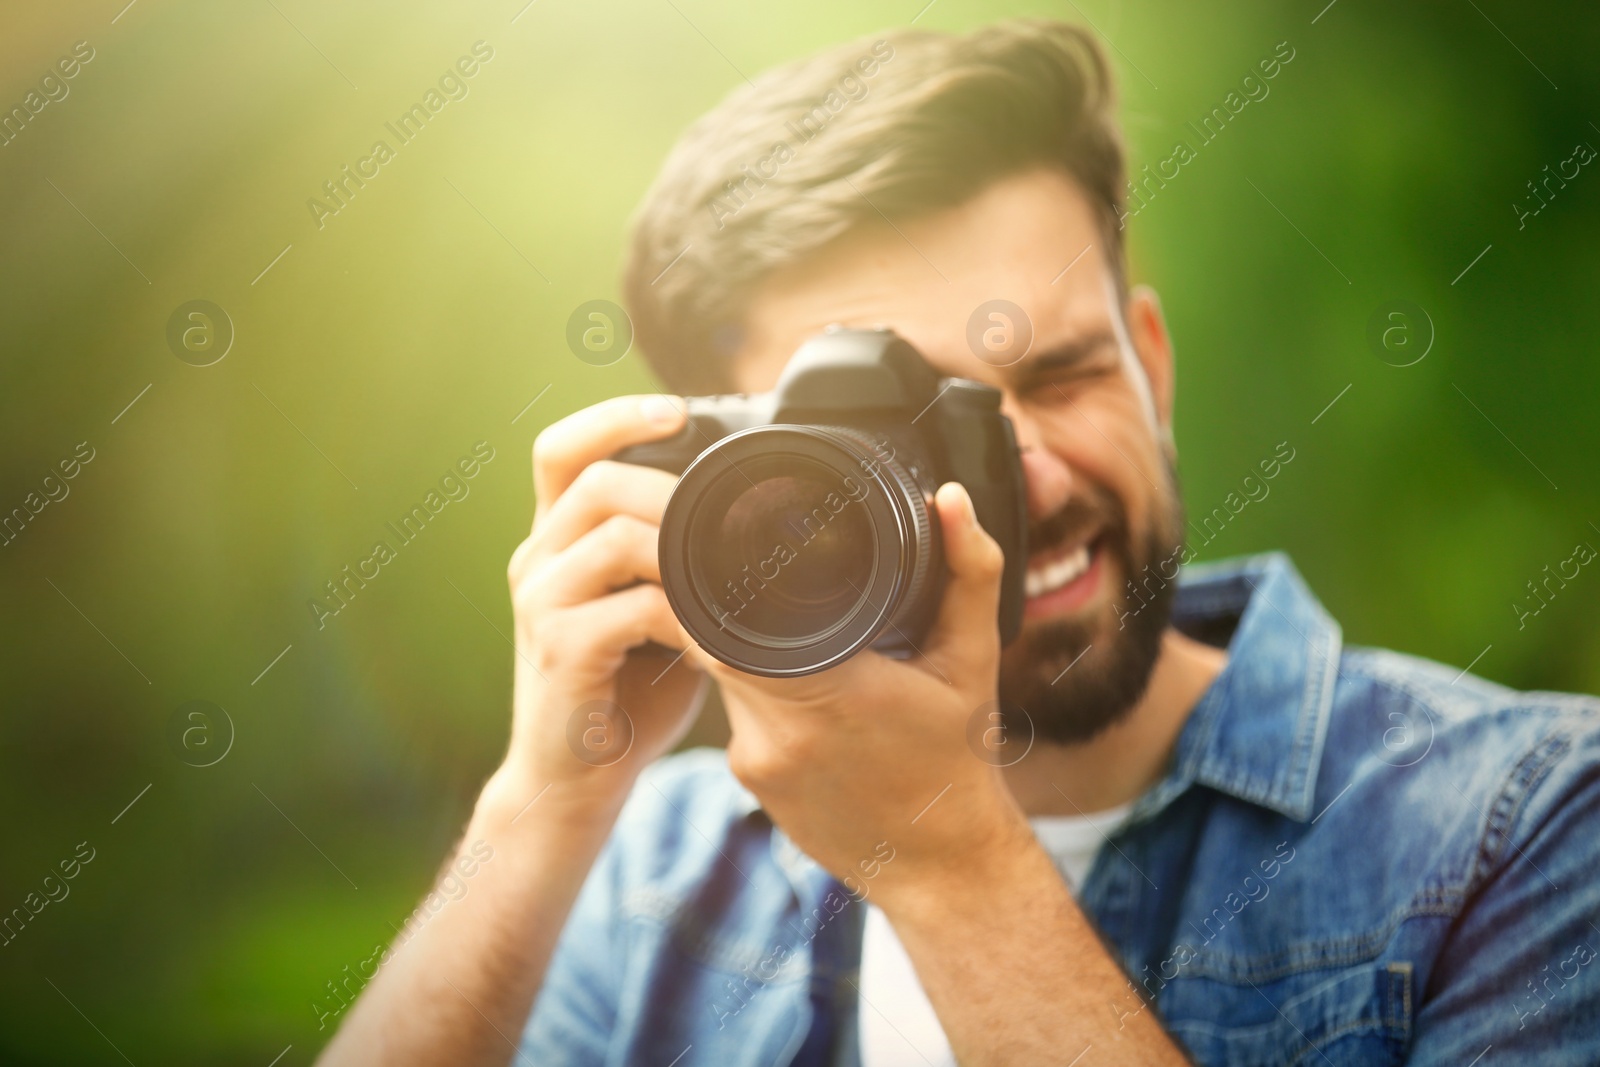 Image of Photographer taking photo with professional camera in park